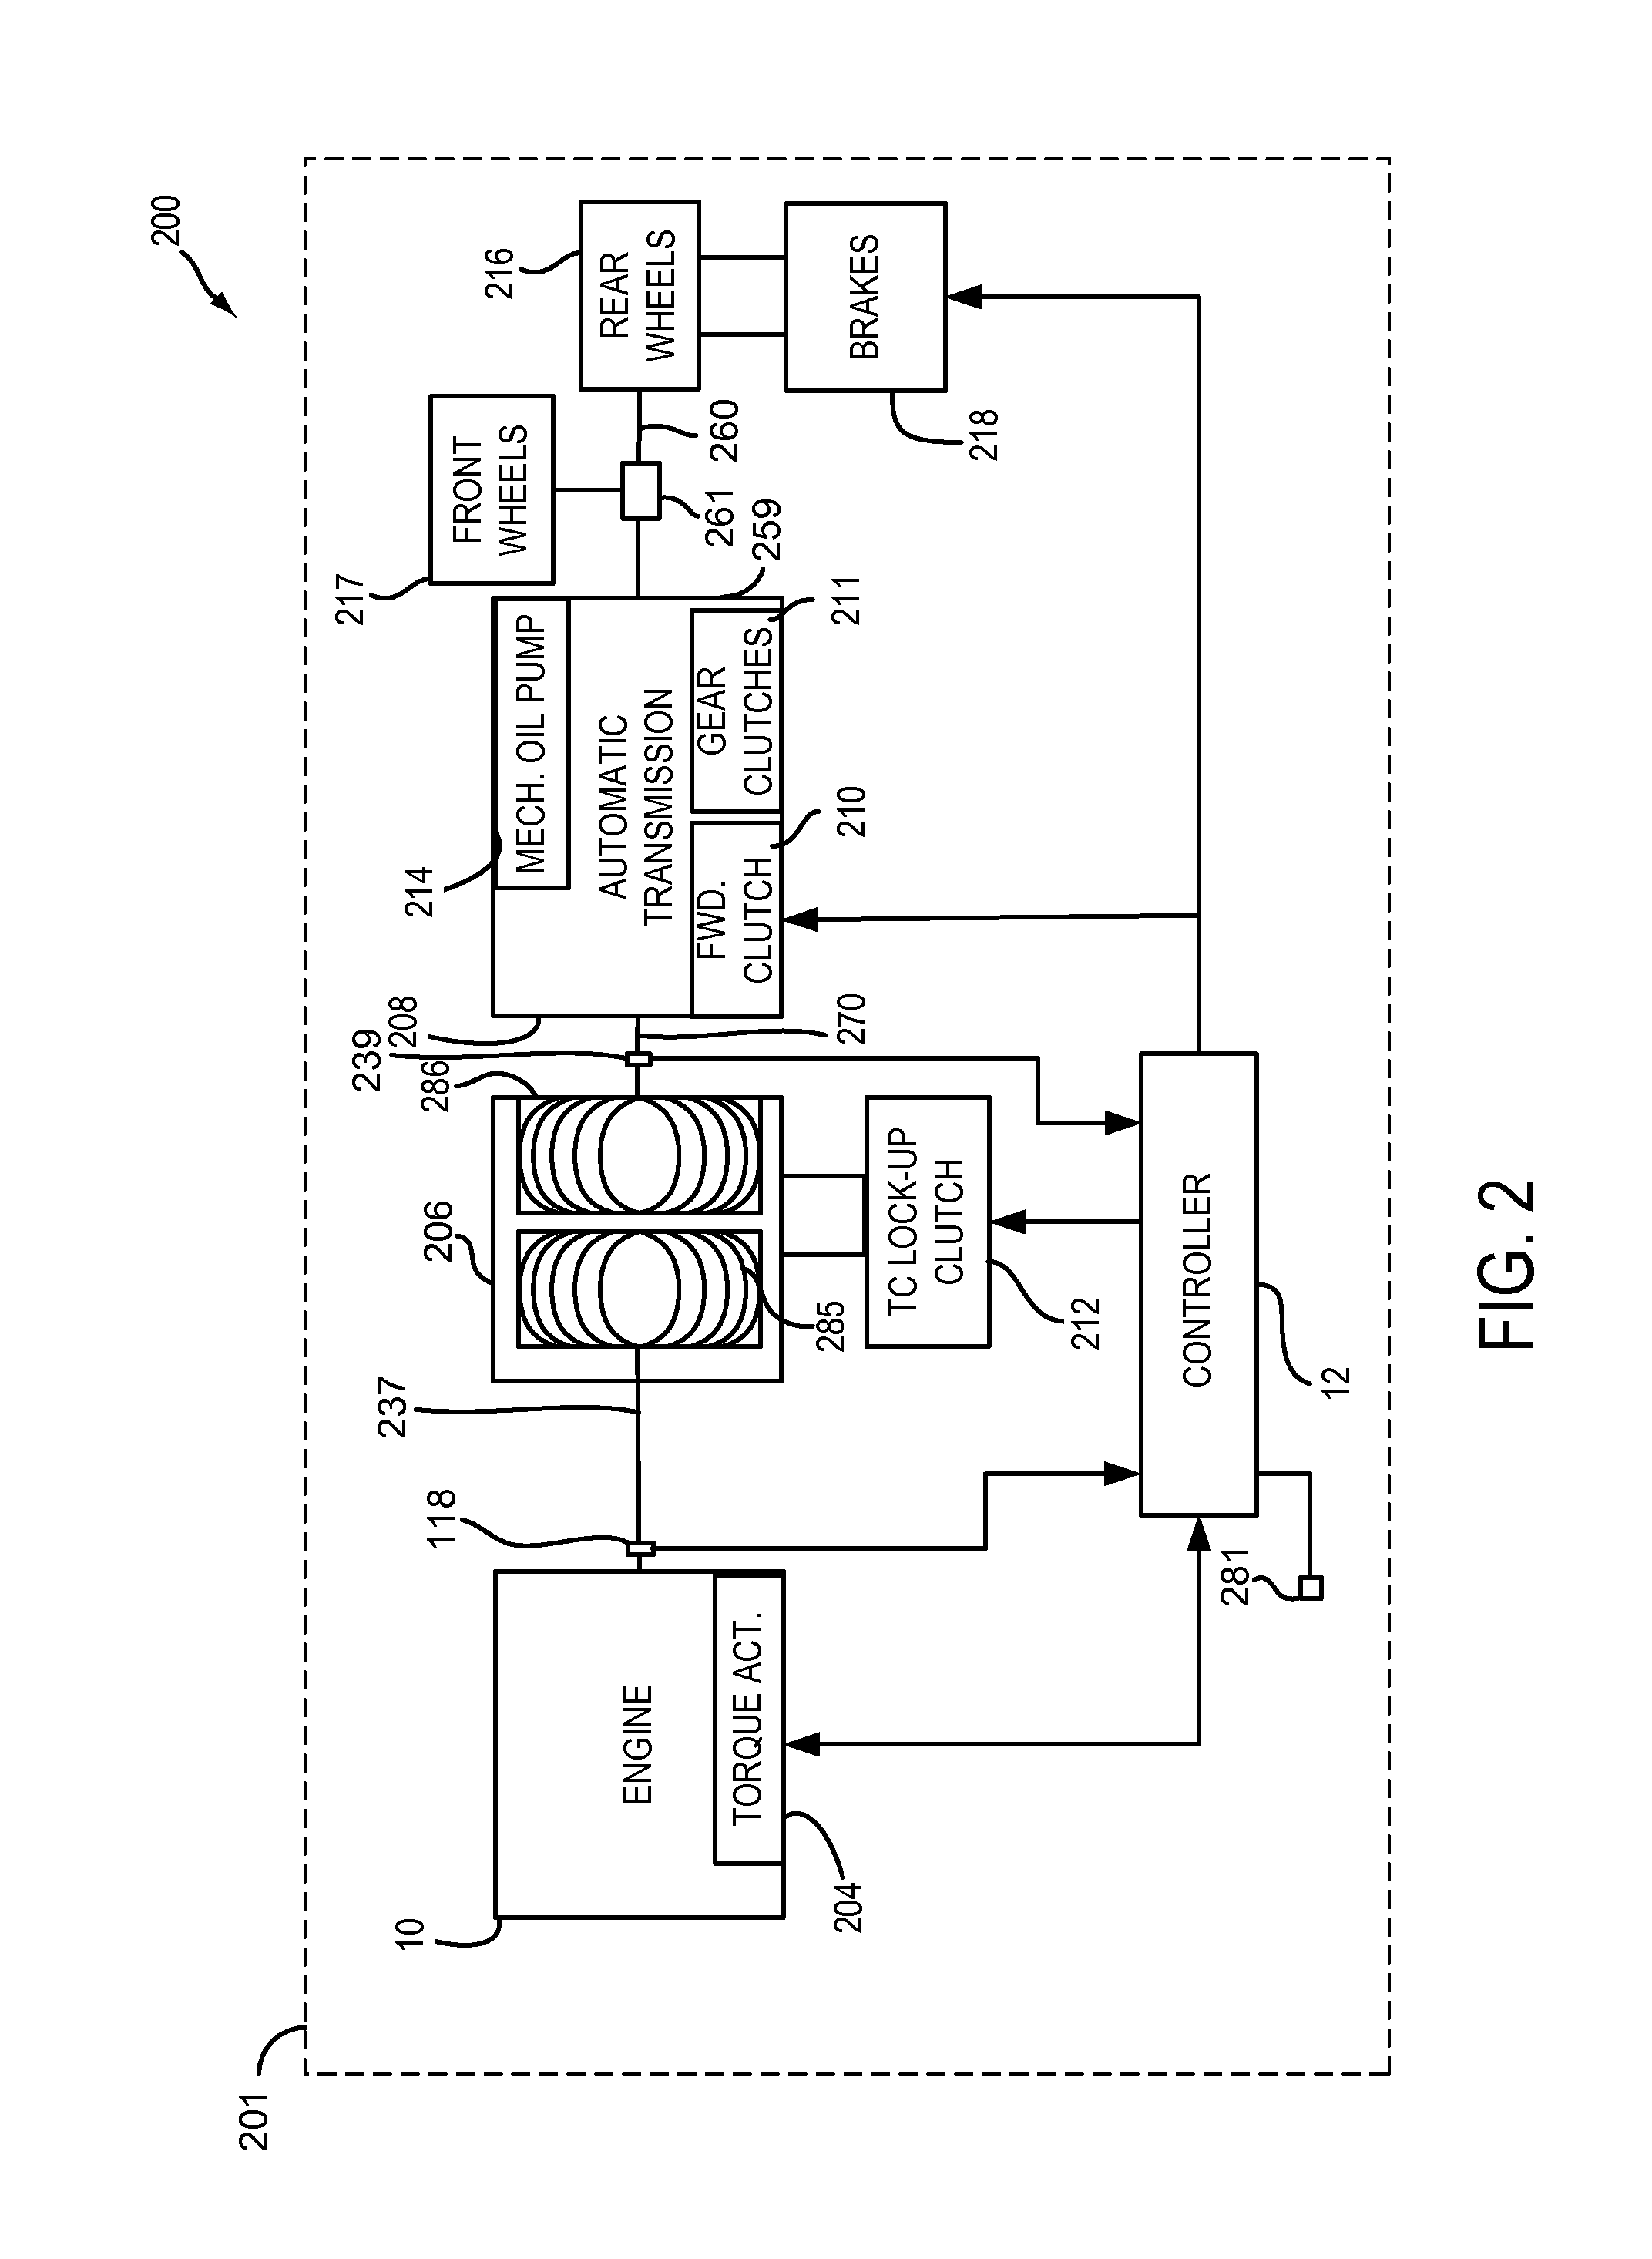 Method and system for engine starting